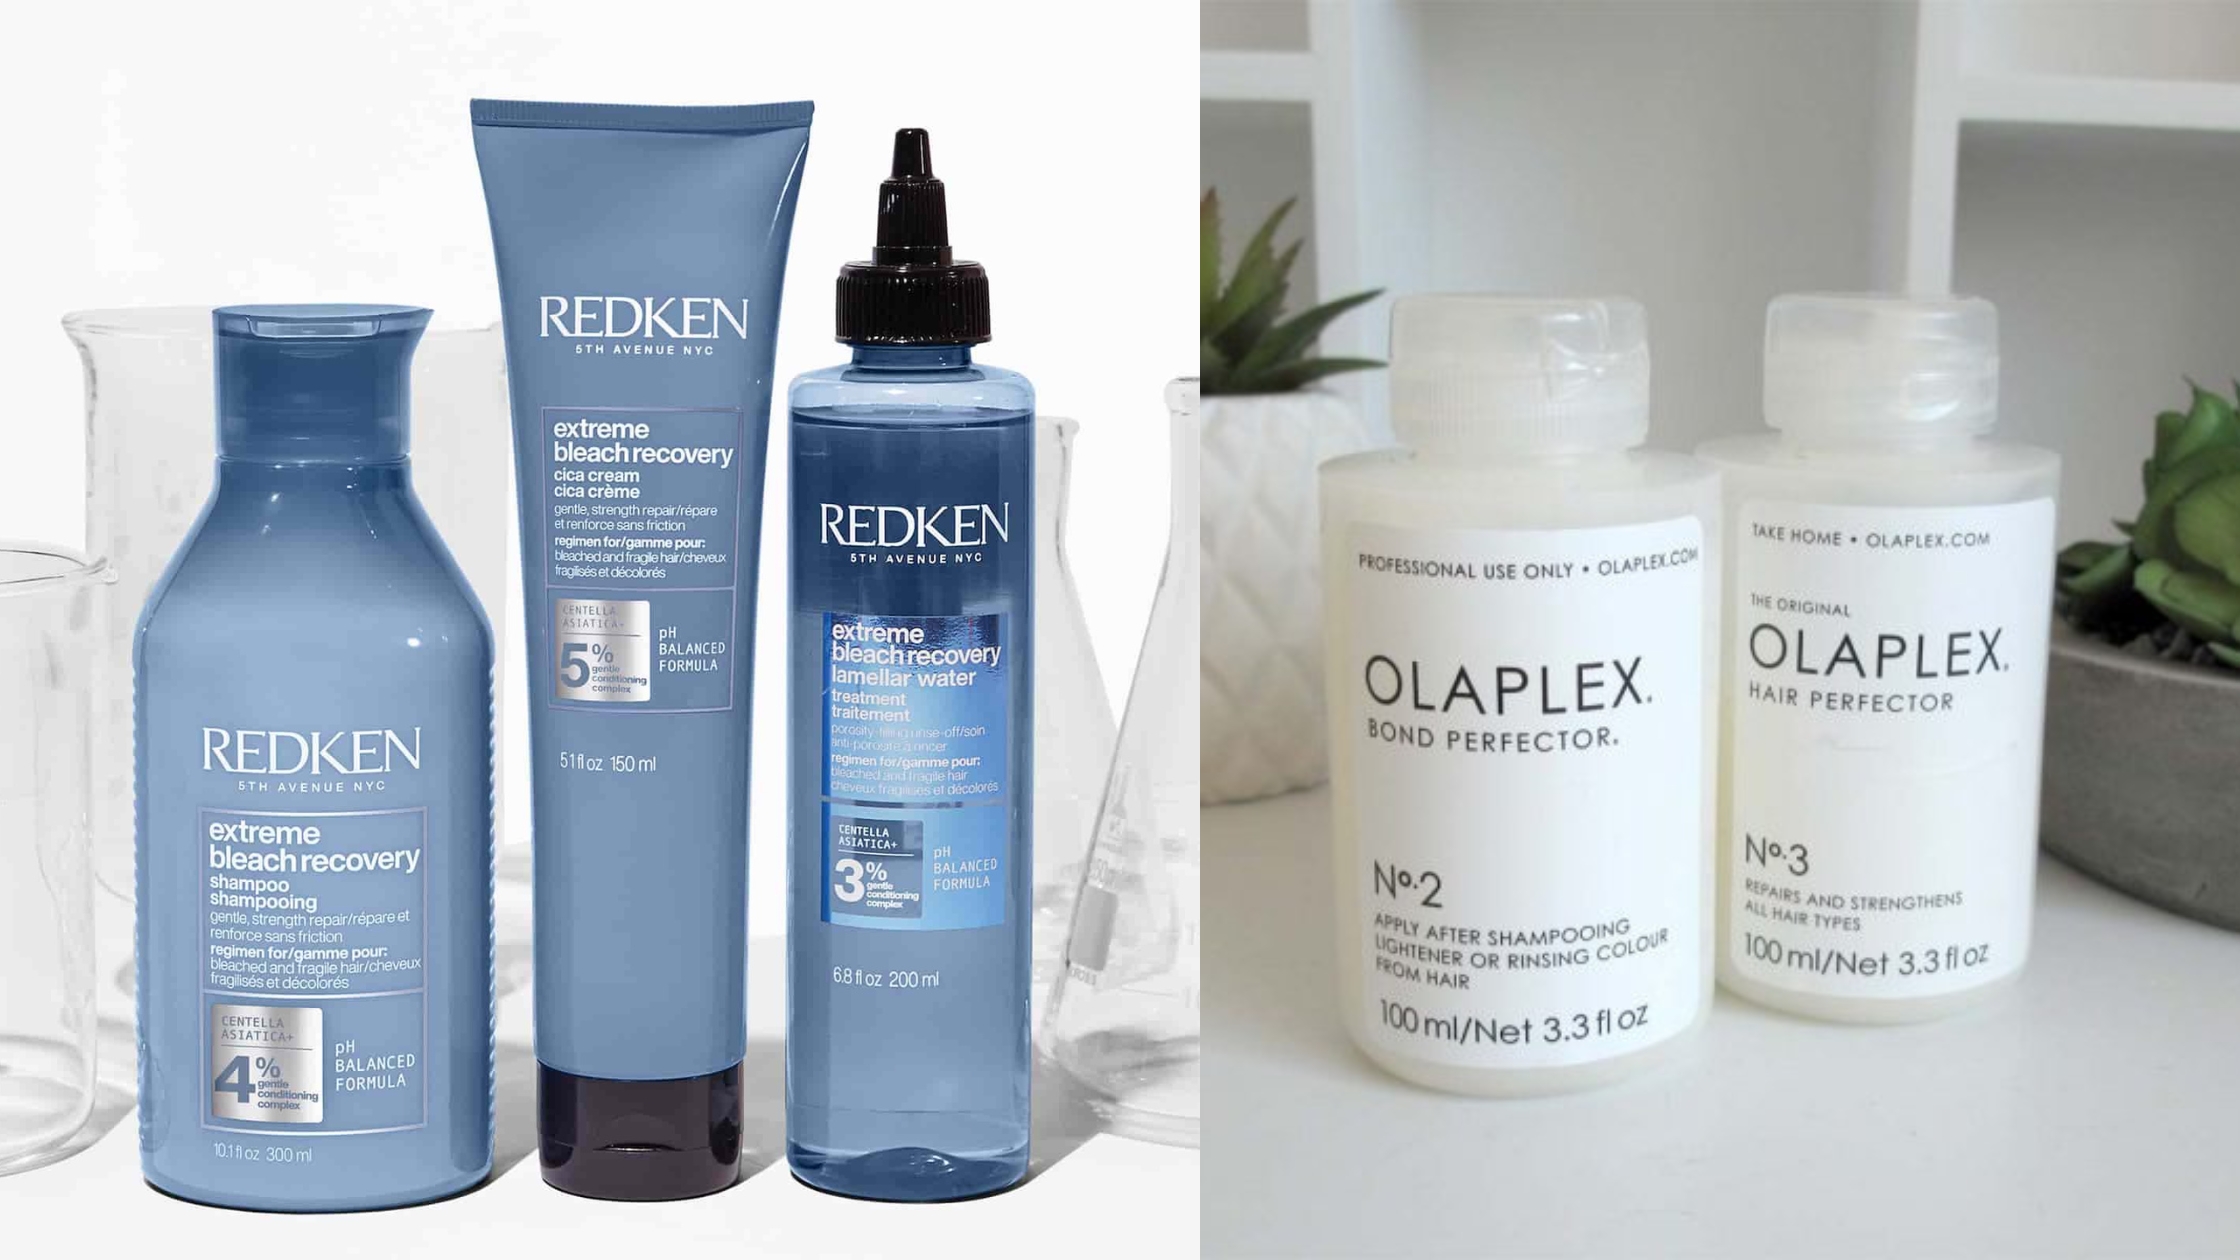 Redken Extreme Bleach Recovery vs Olaplex Any Difference